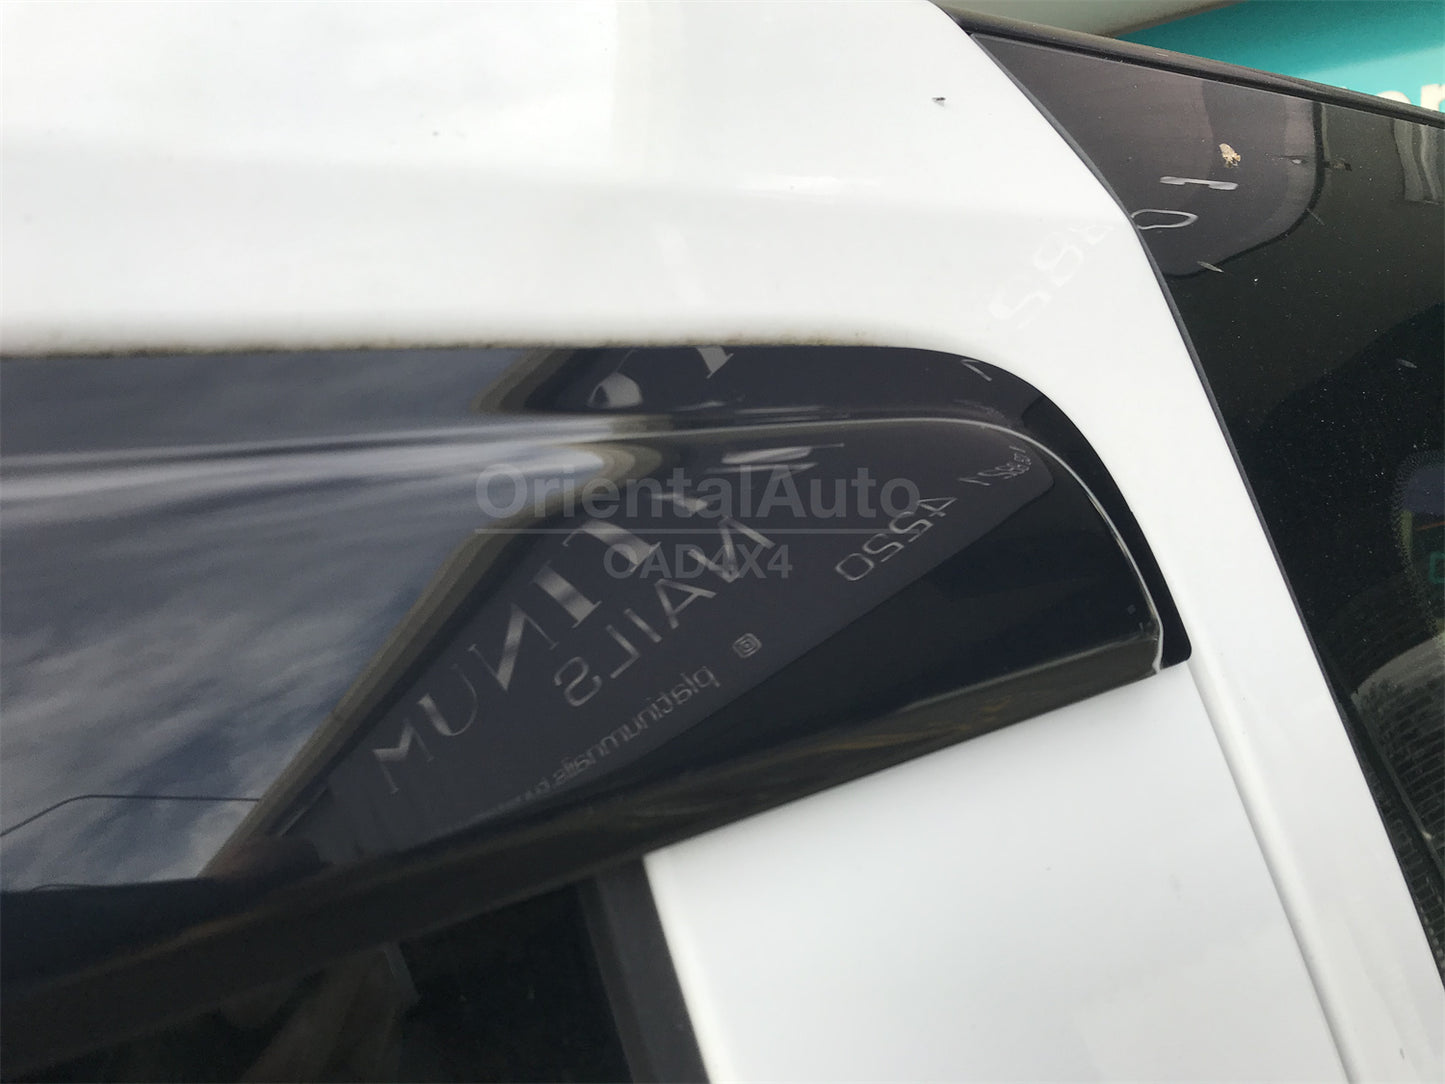 Luxury Weathershields For Land Rover Discovery 3 4 2004-2017 Weather Shields Window Visor